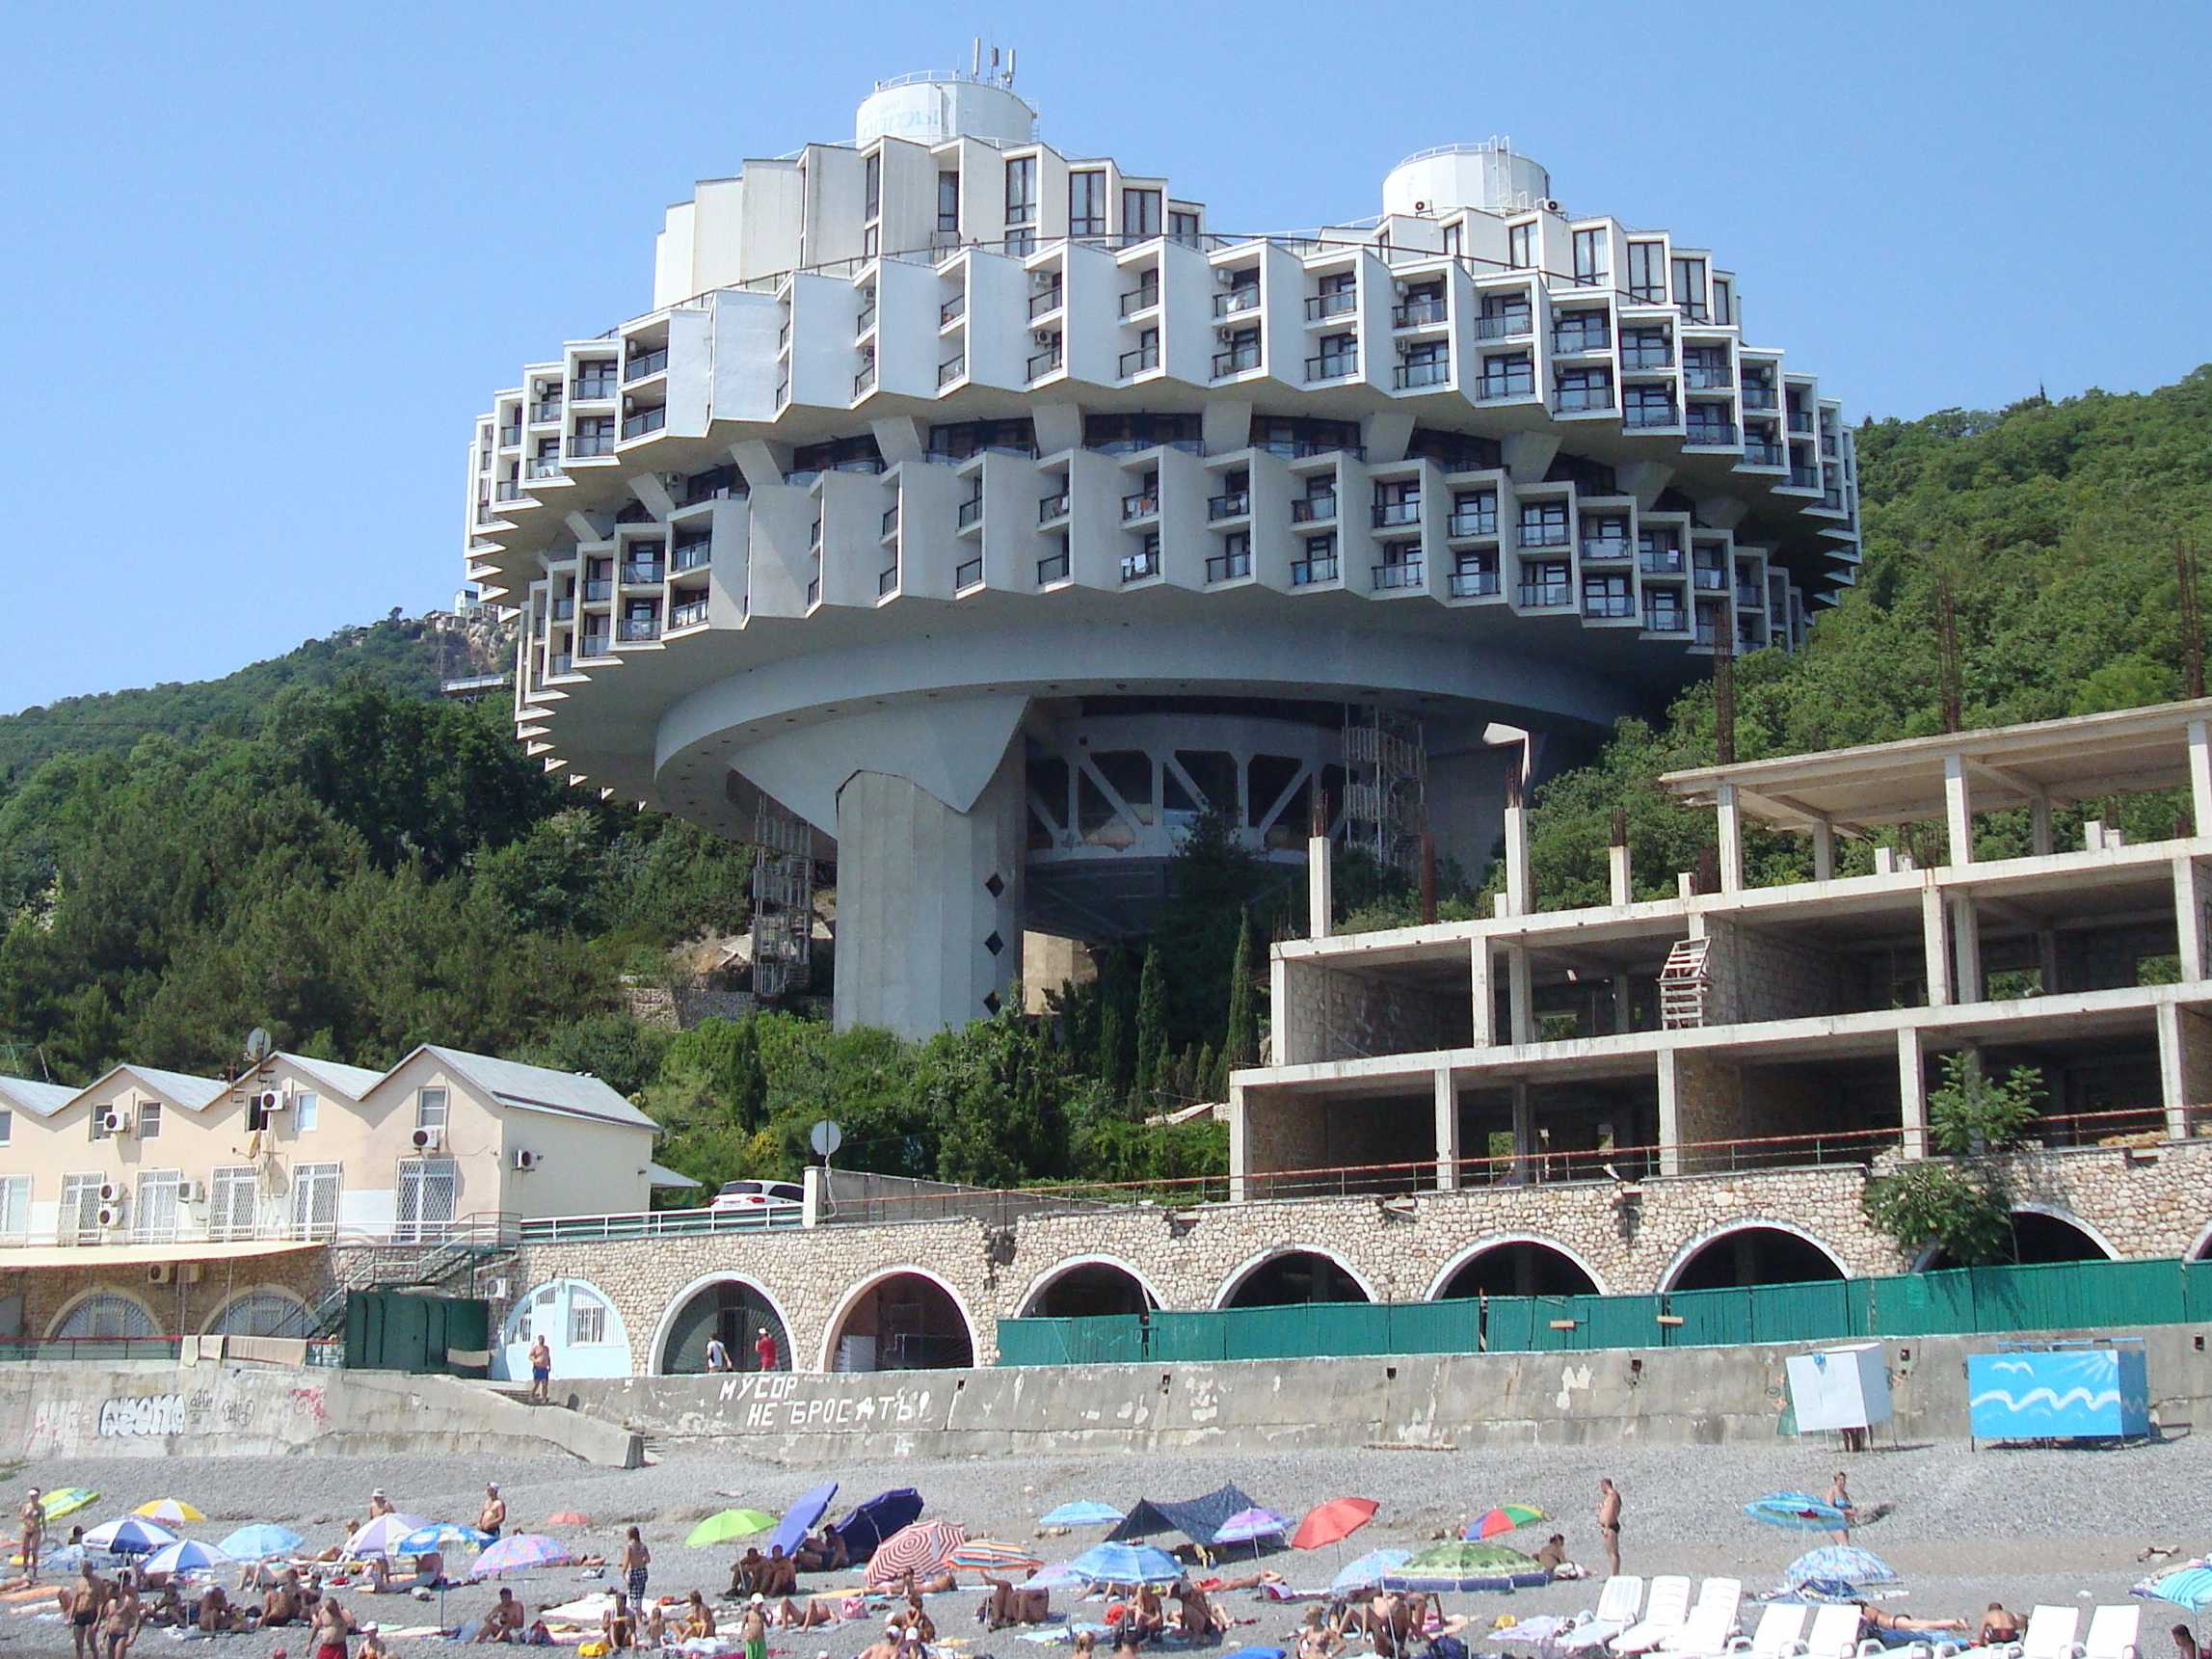 http://www.businessinsider.in/photo/52363872/the-12-most-absurd-soviet-era-buildings-that-are-still-standing/This-resort-in-Ukraine-combines-two-late-Soviet-architectural-trends-Constructing-things-off-the-ground-and-buildings-that-look-slightly-like-UFOs-.jpg